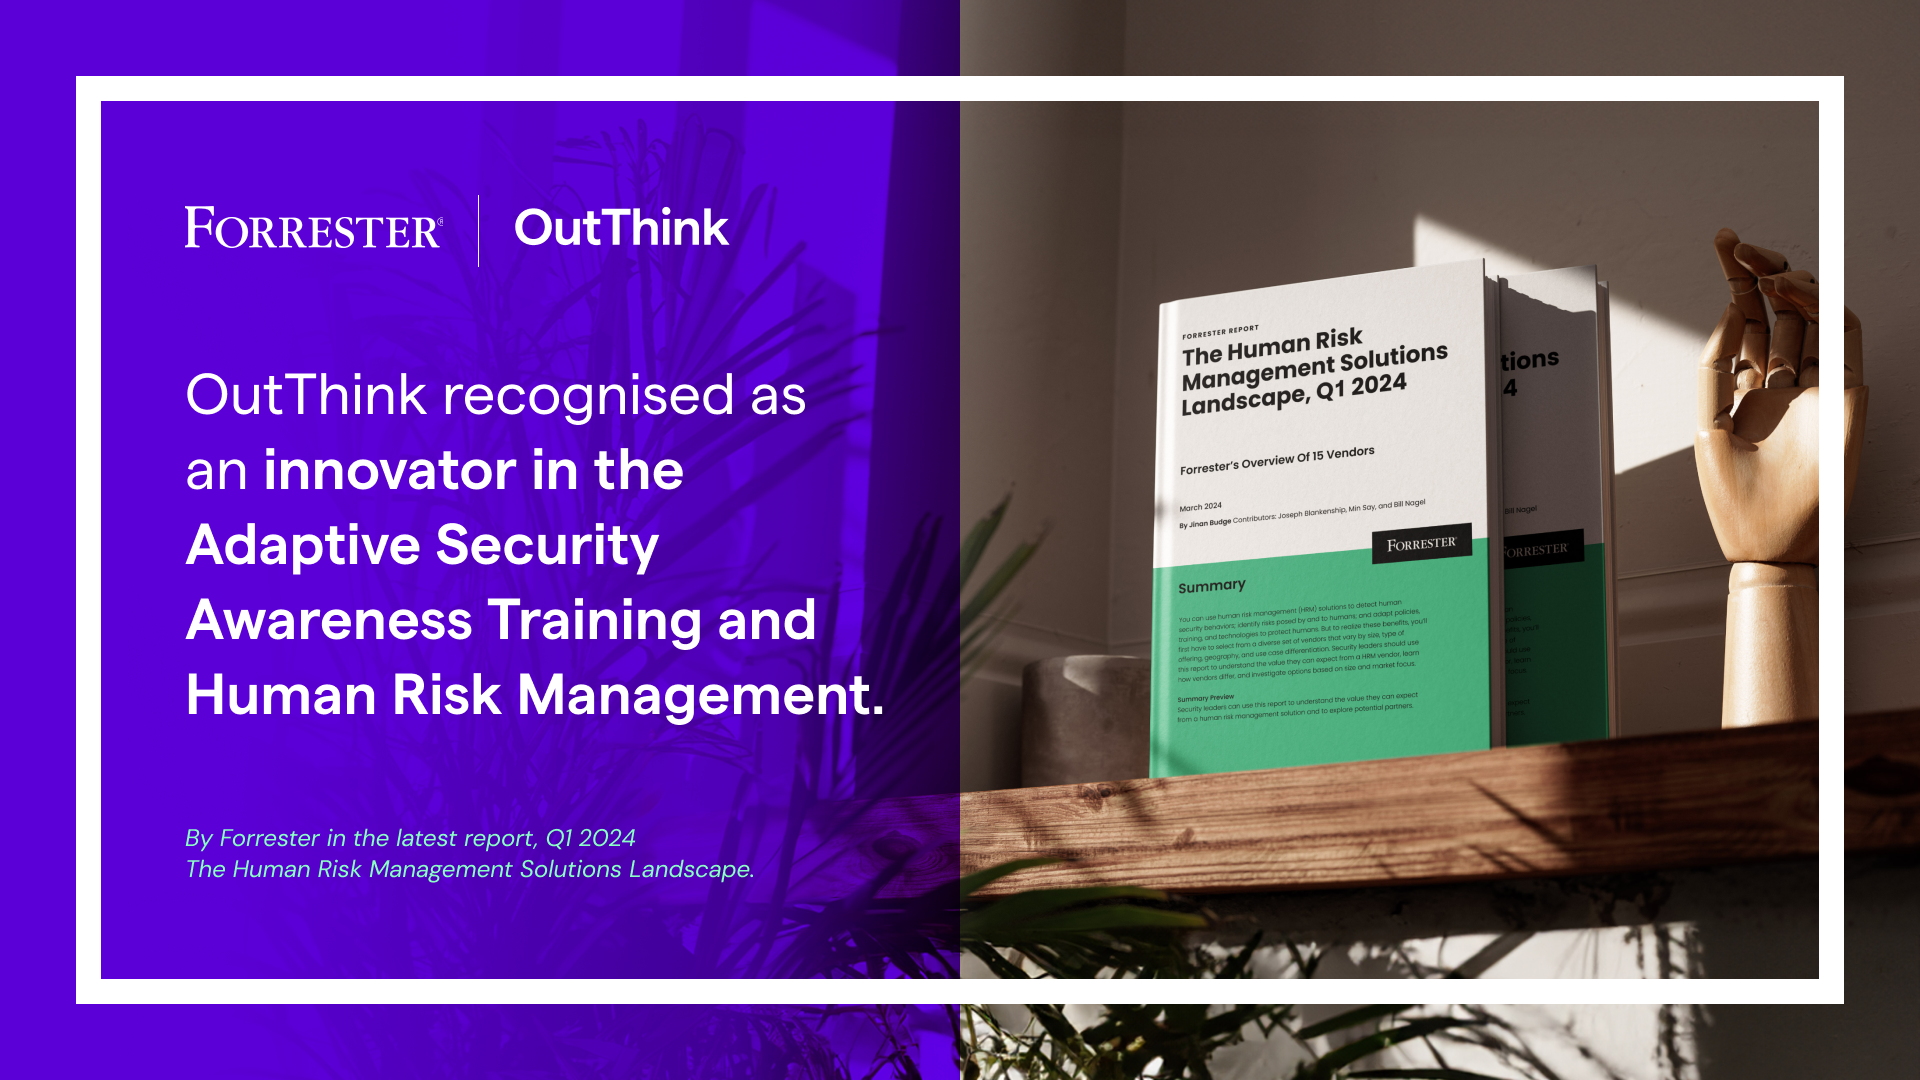 OutThink is a Forrester recognised vendor innovating in the human risk management space.